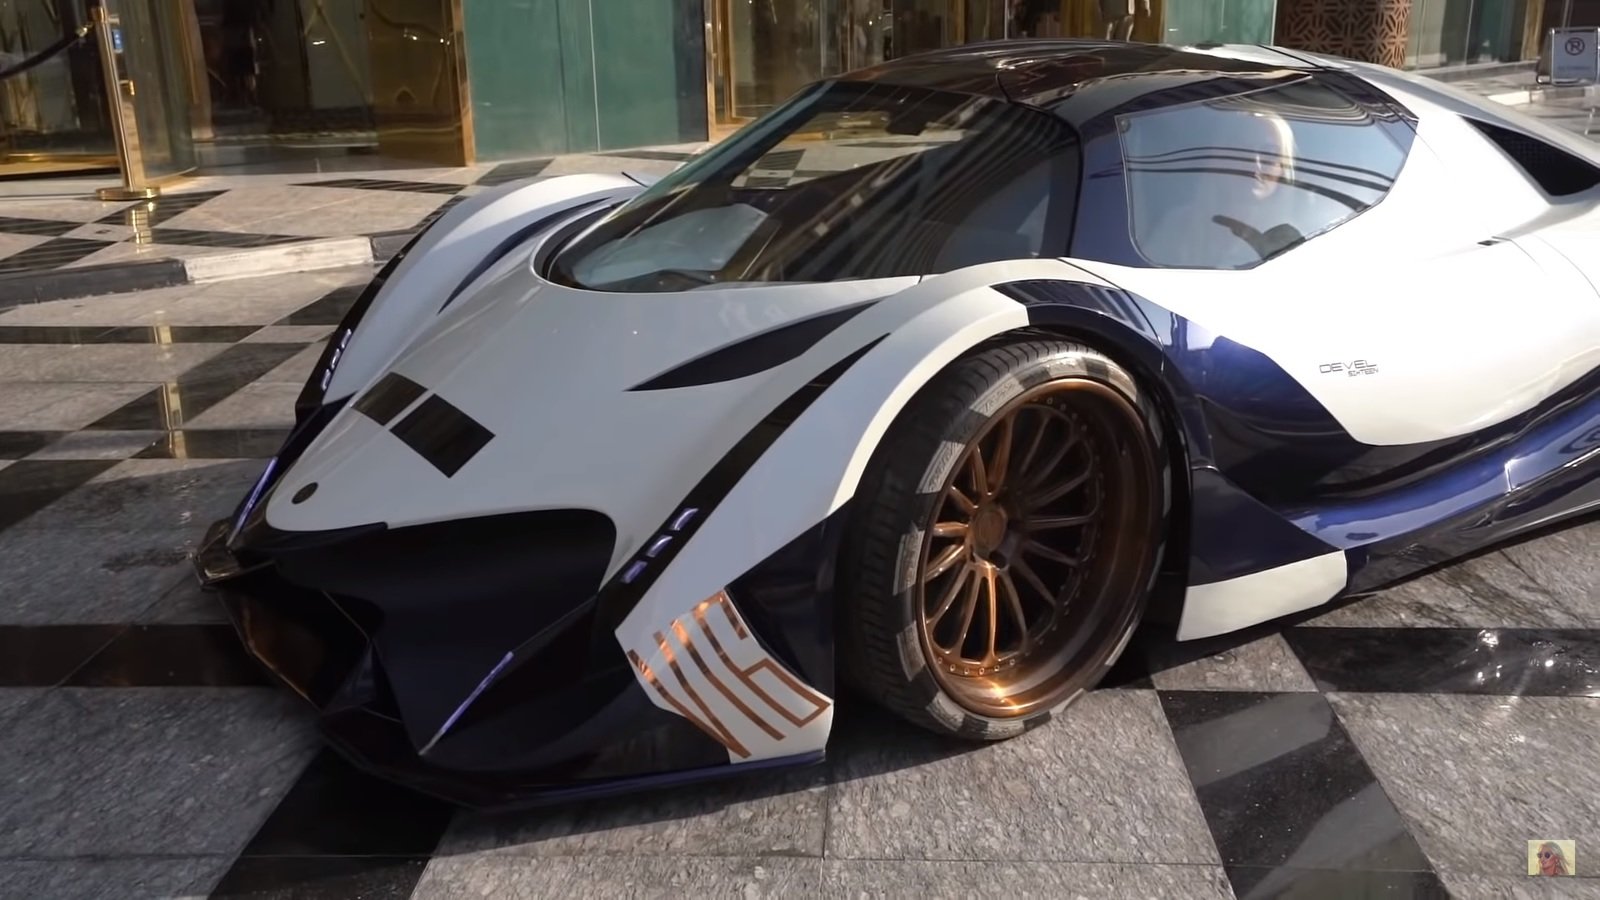 Remember The Mythical 5000 Horsepower Devel Sixteen? Well, Supercar Blondie Just Drove It